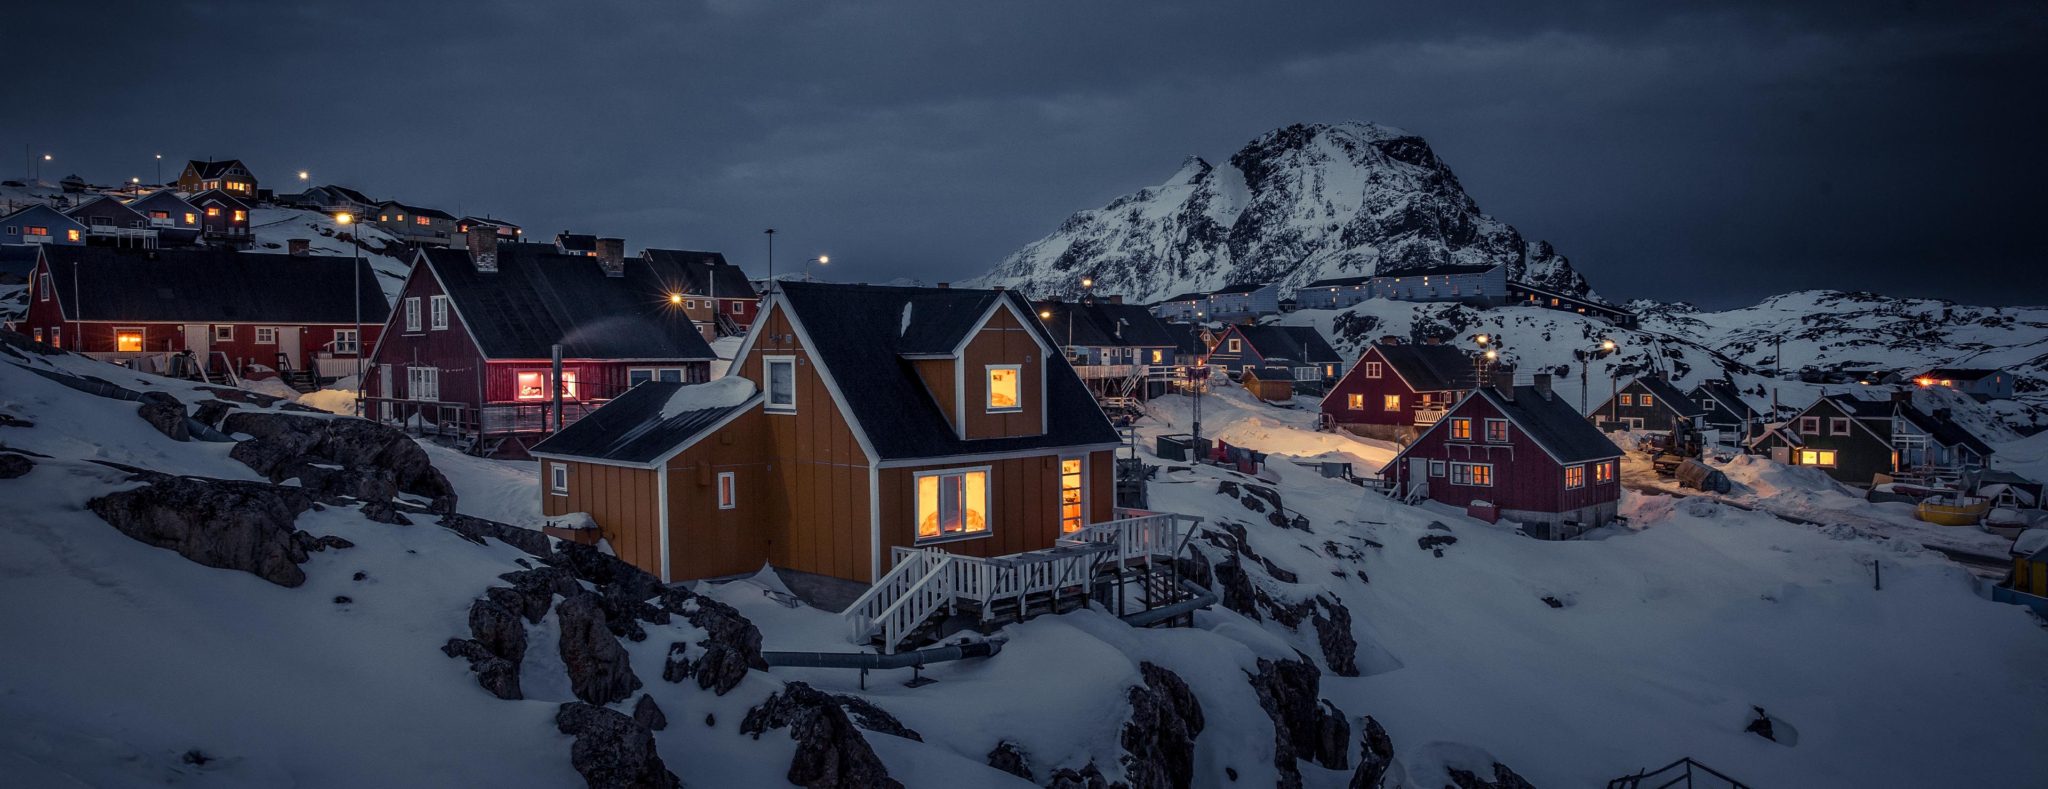 An evening view of one of the neighbourhoods in Sisimiut in Greenland